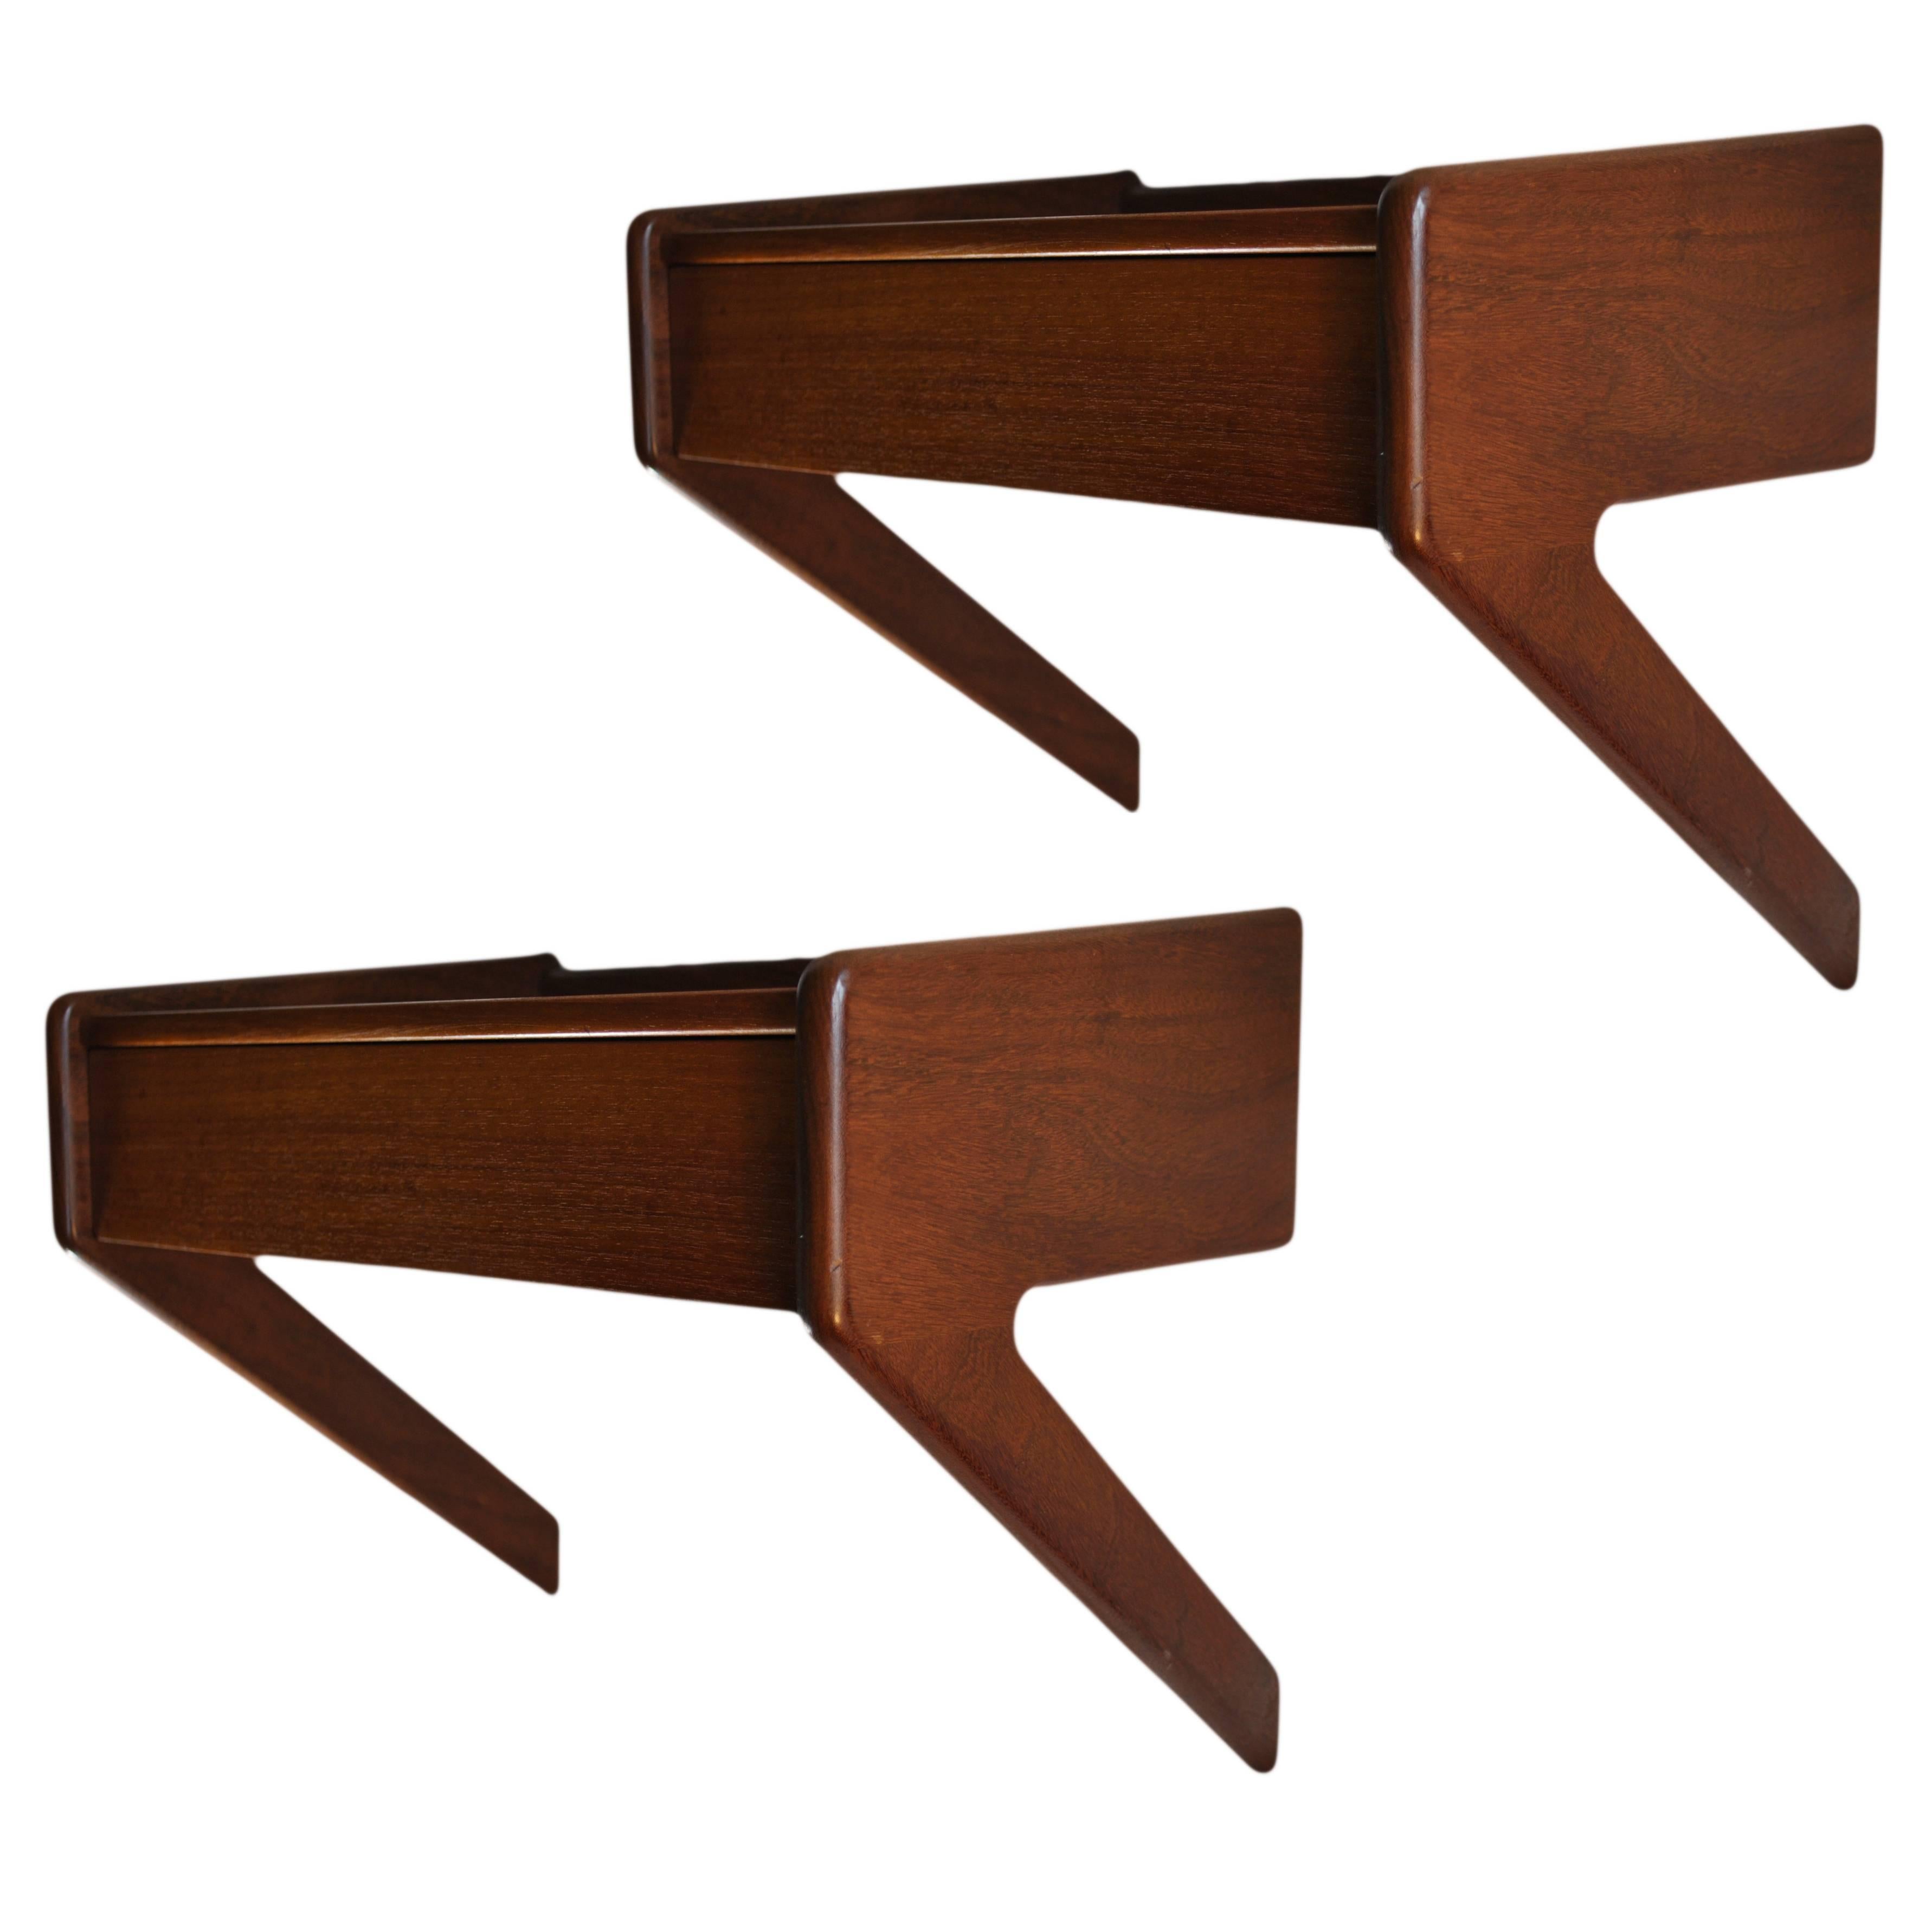 Danish Nightstands, Pair of Floating Wall Hung Bedsides